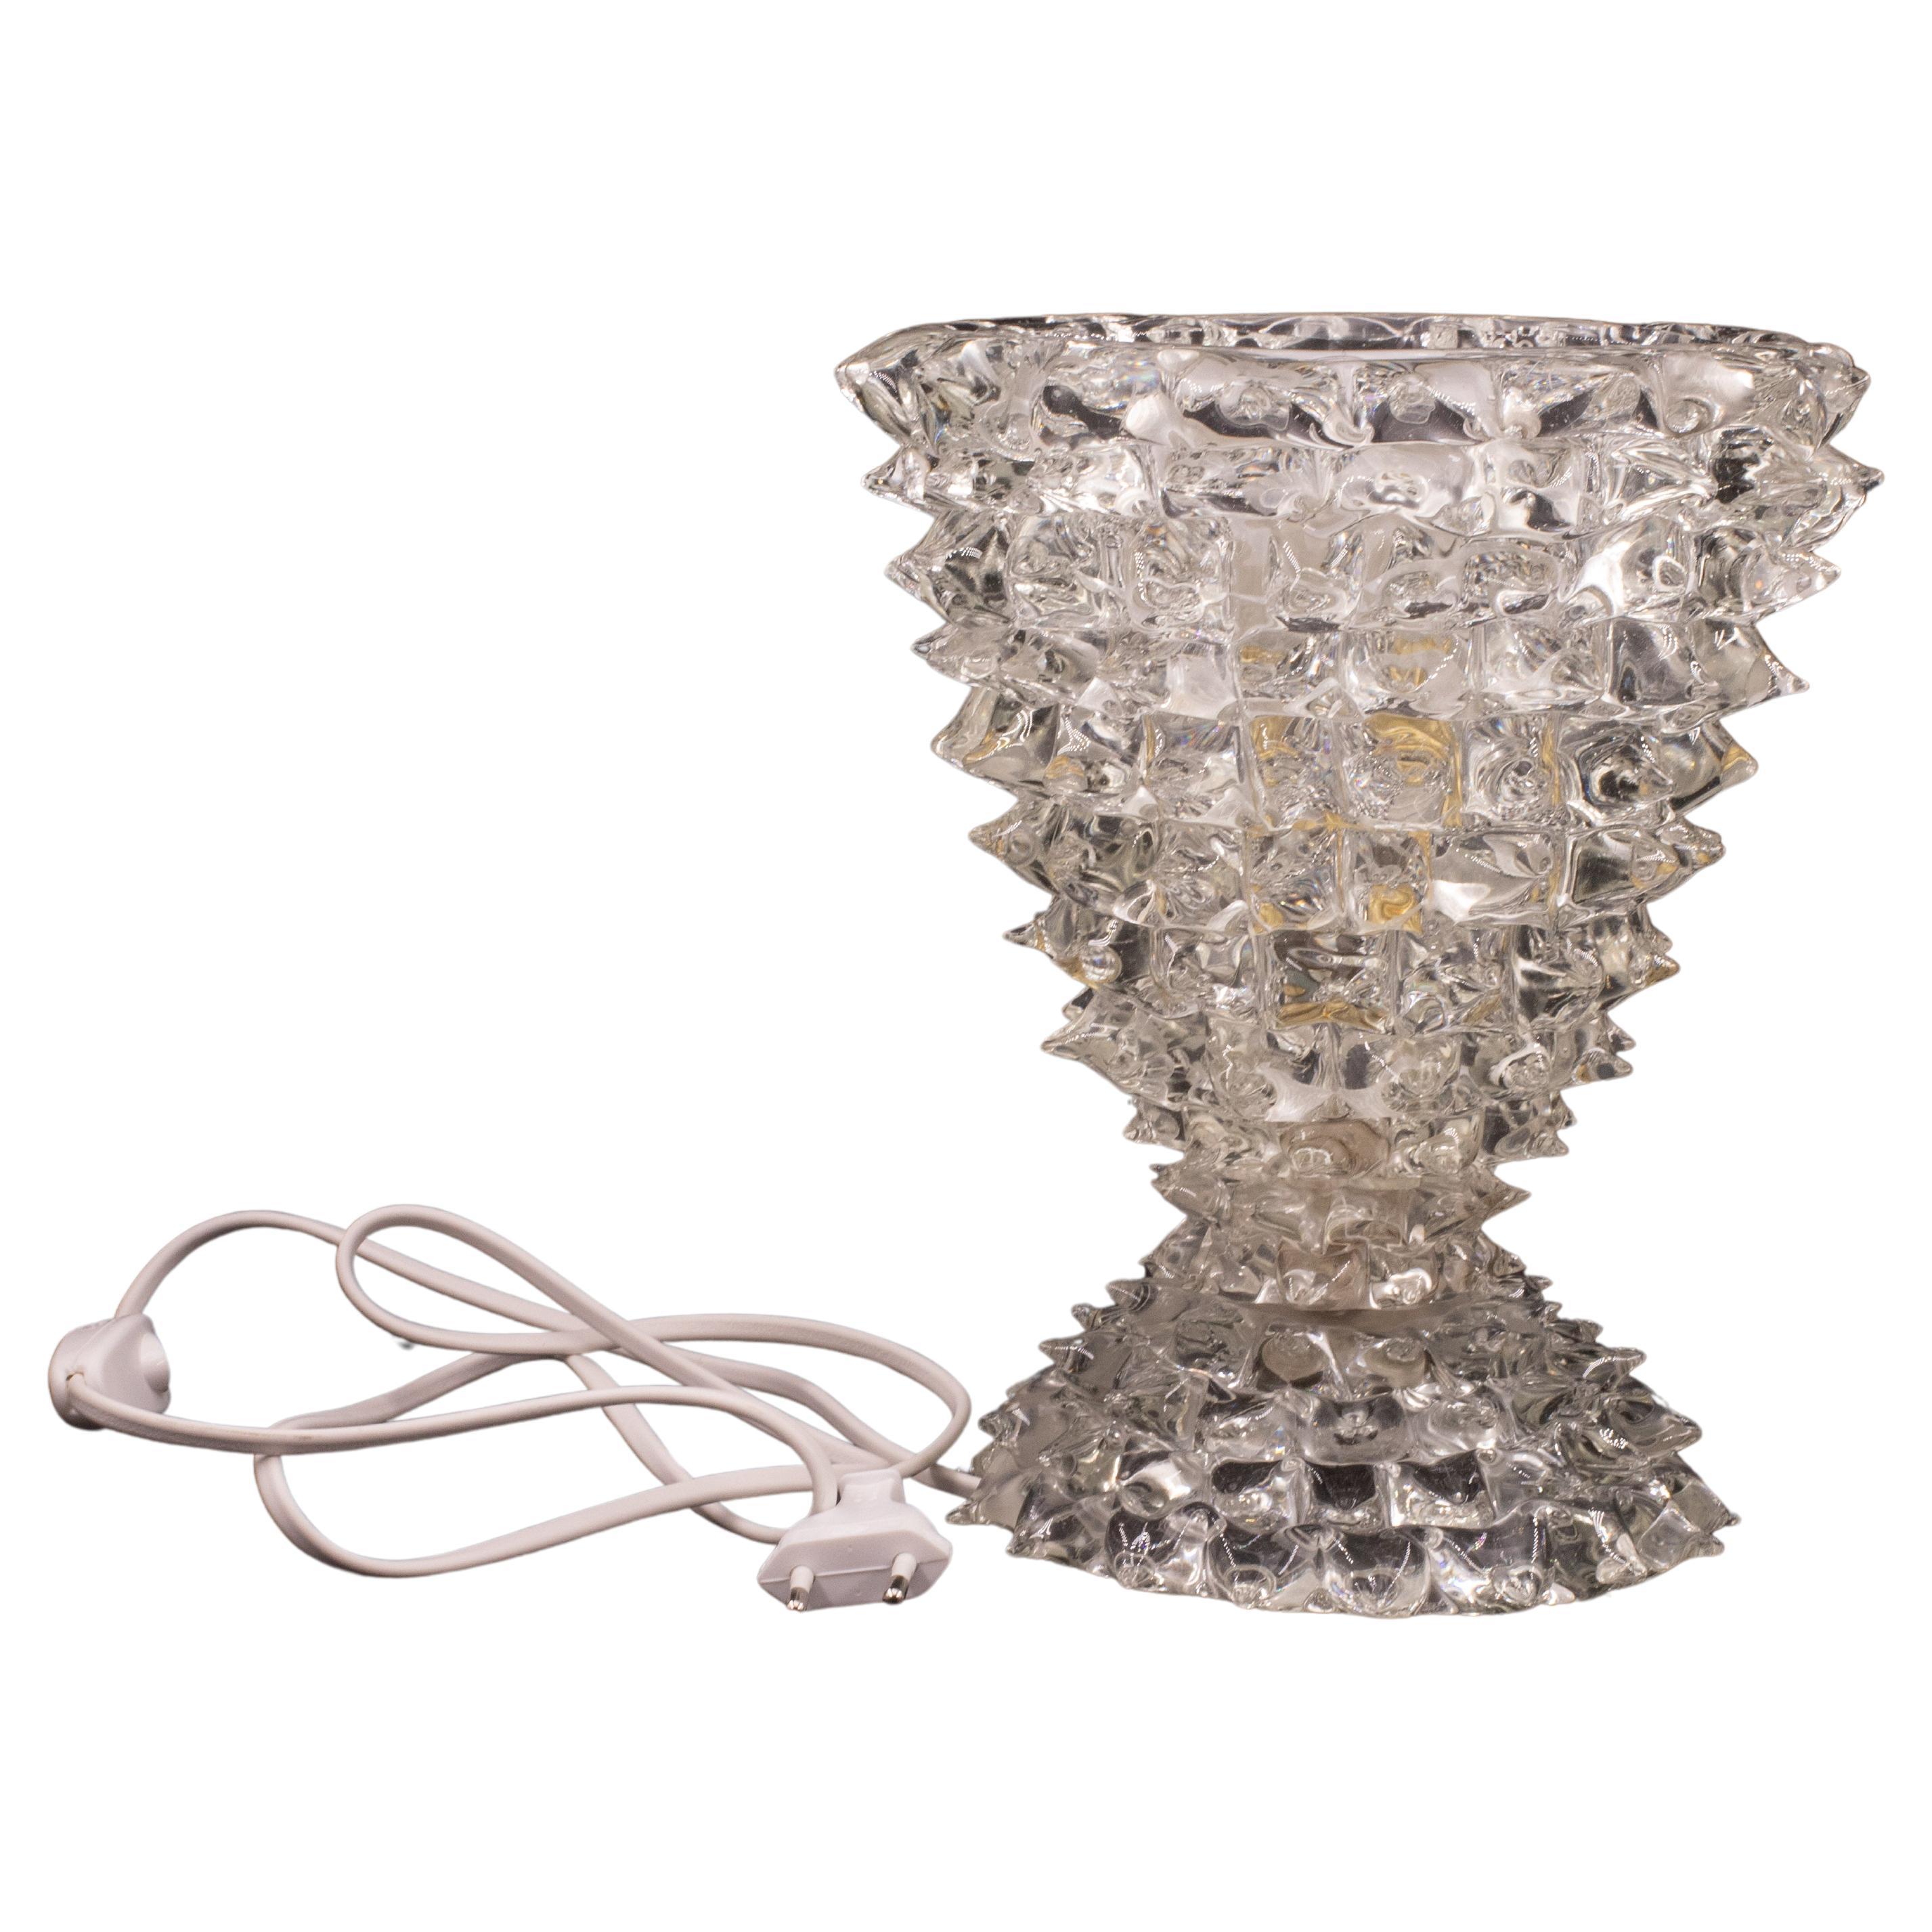 Amazing Table Lamp in Rostrato Murano Glass Vase for Barovier & Toso, 1940s For Sale